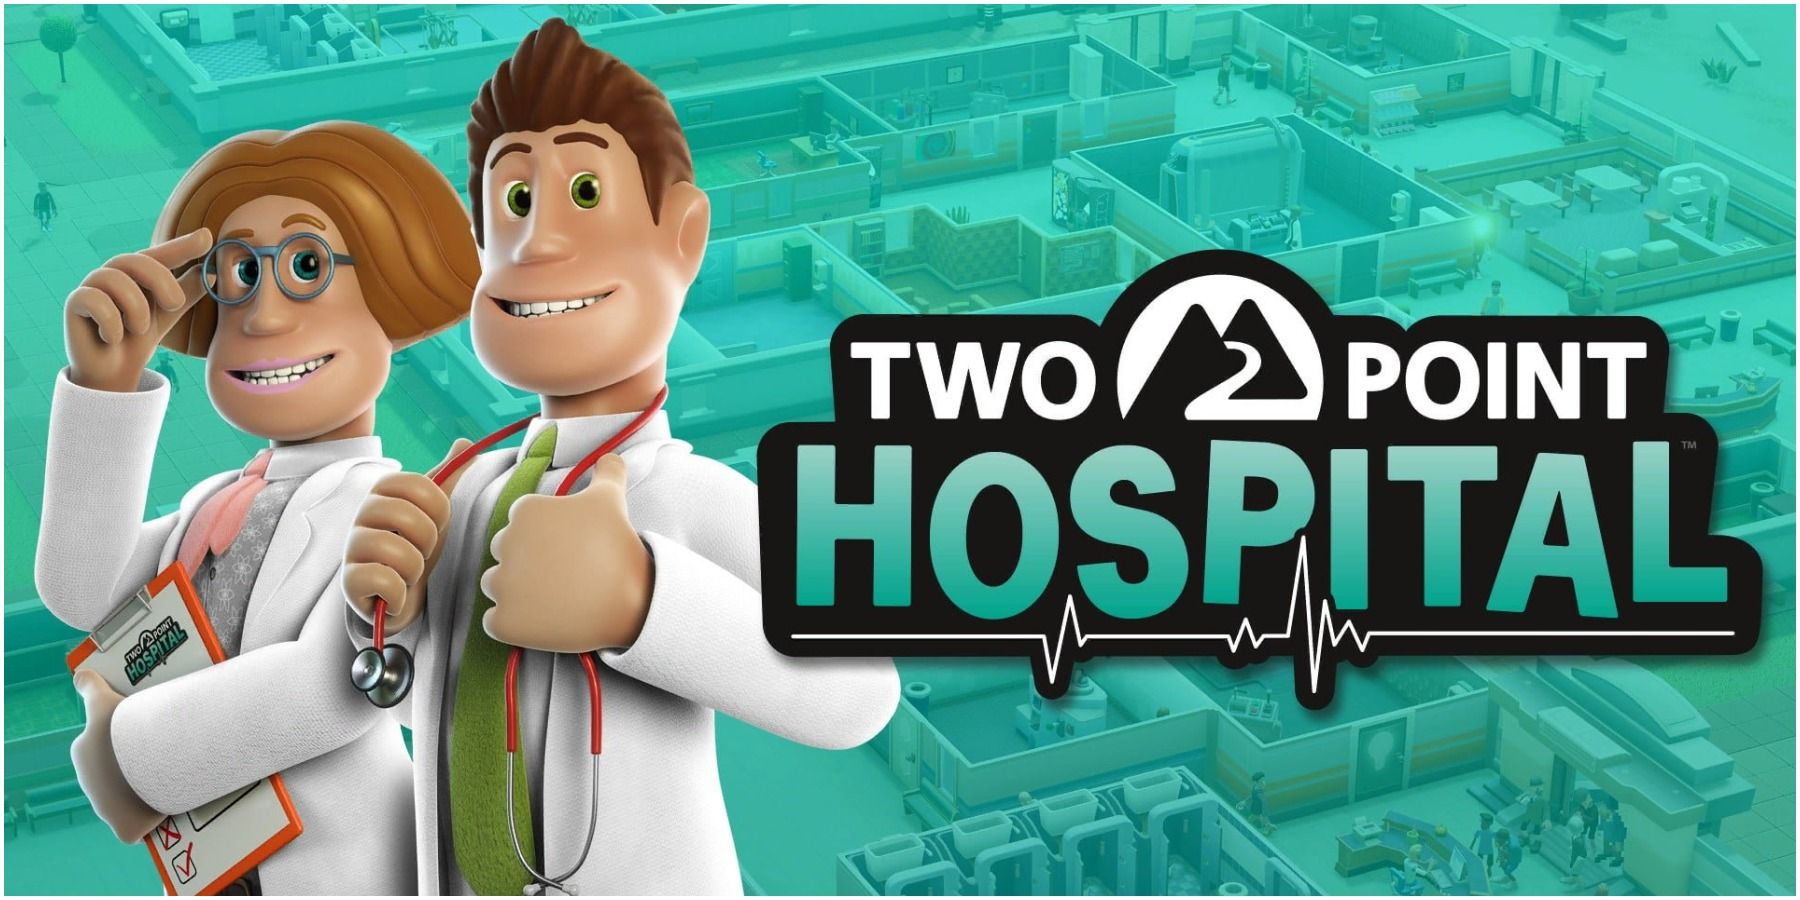 The logo of two point hospital with two doctors to the left